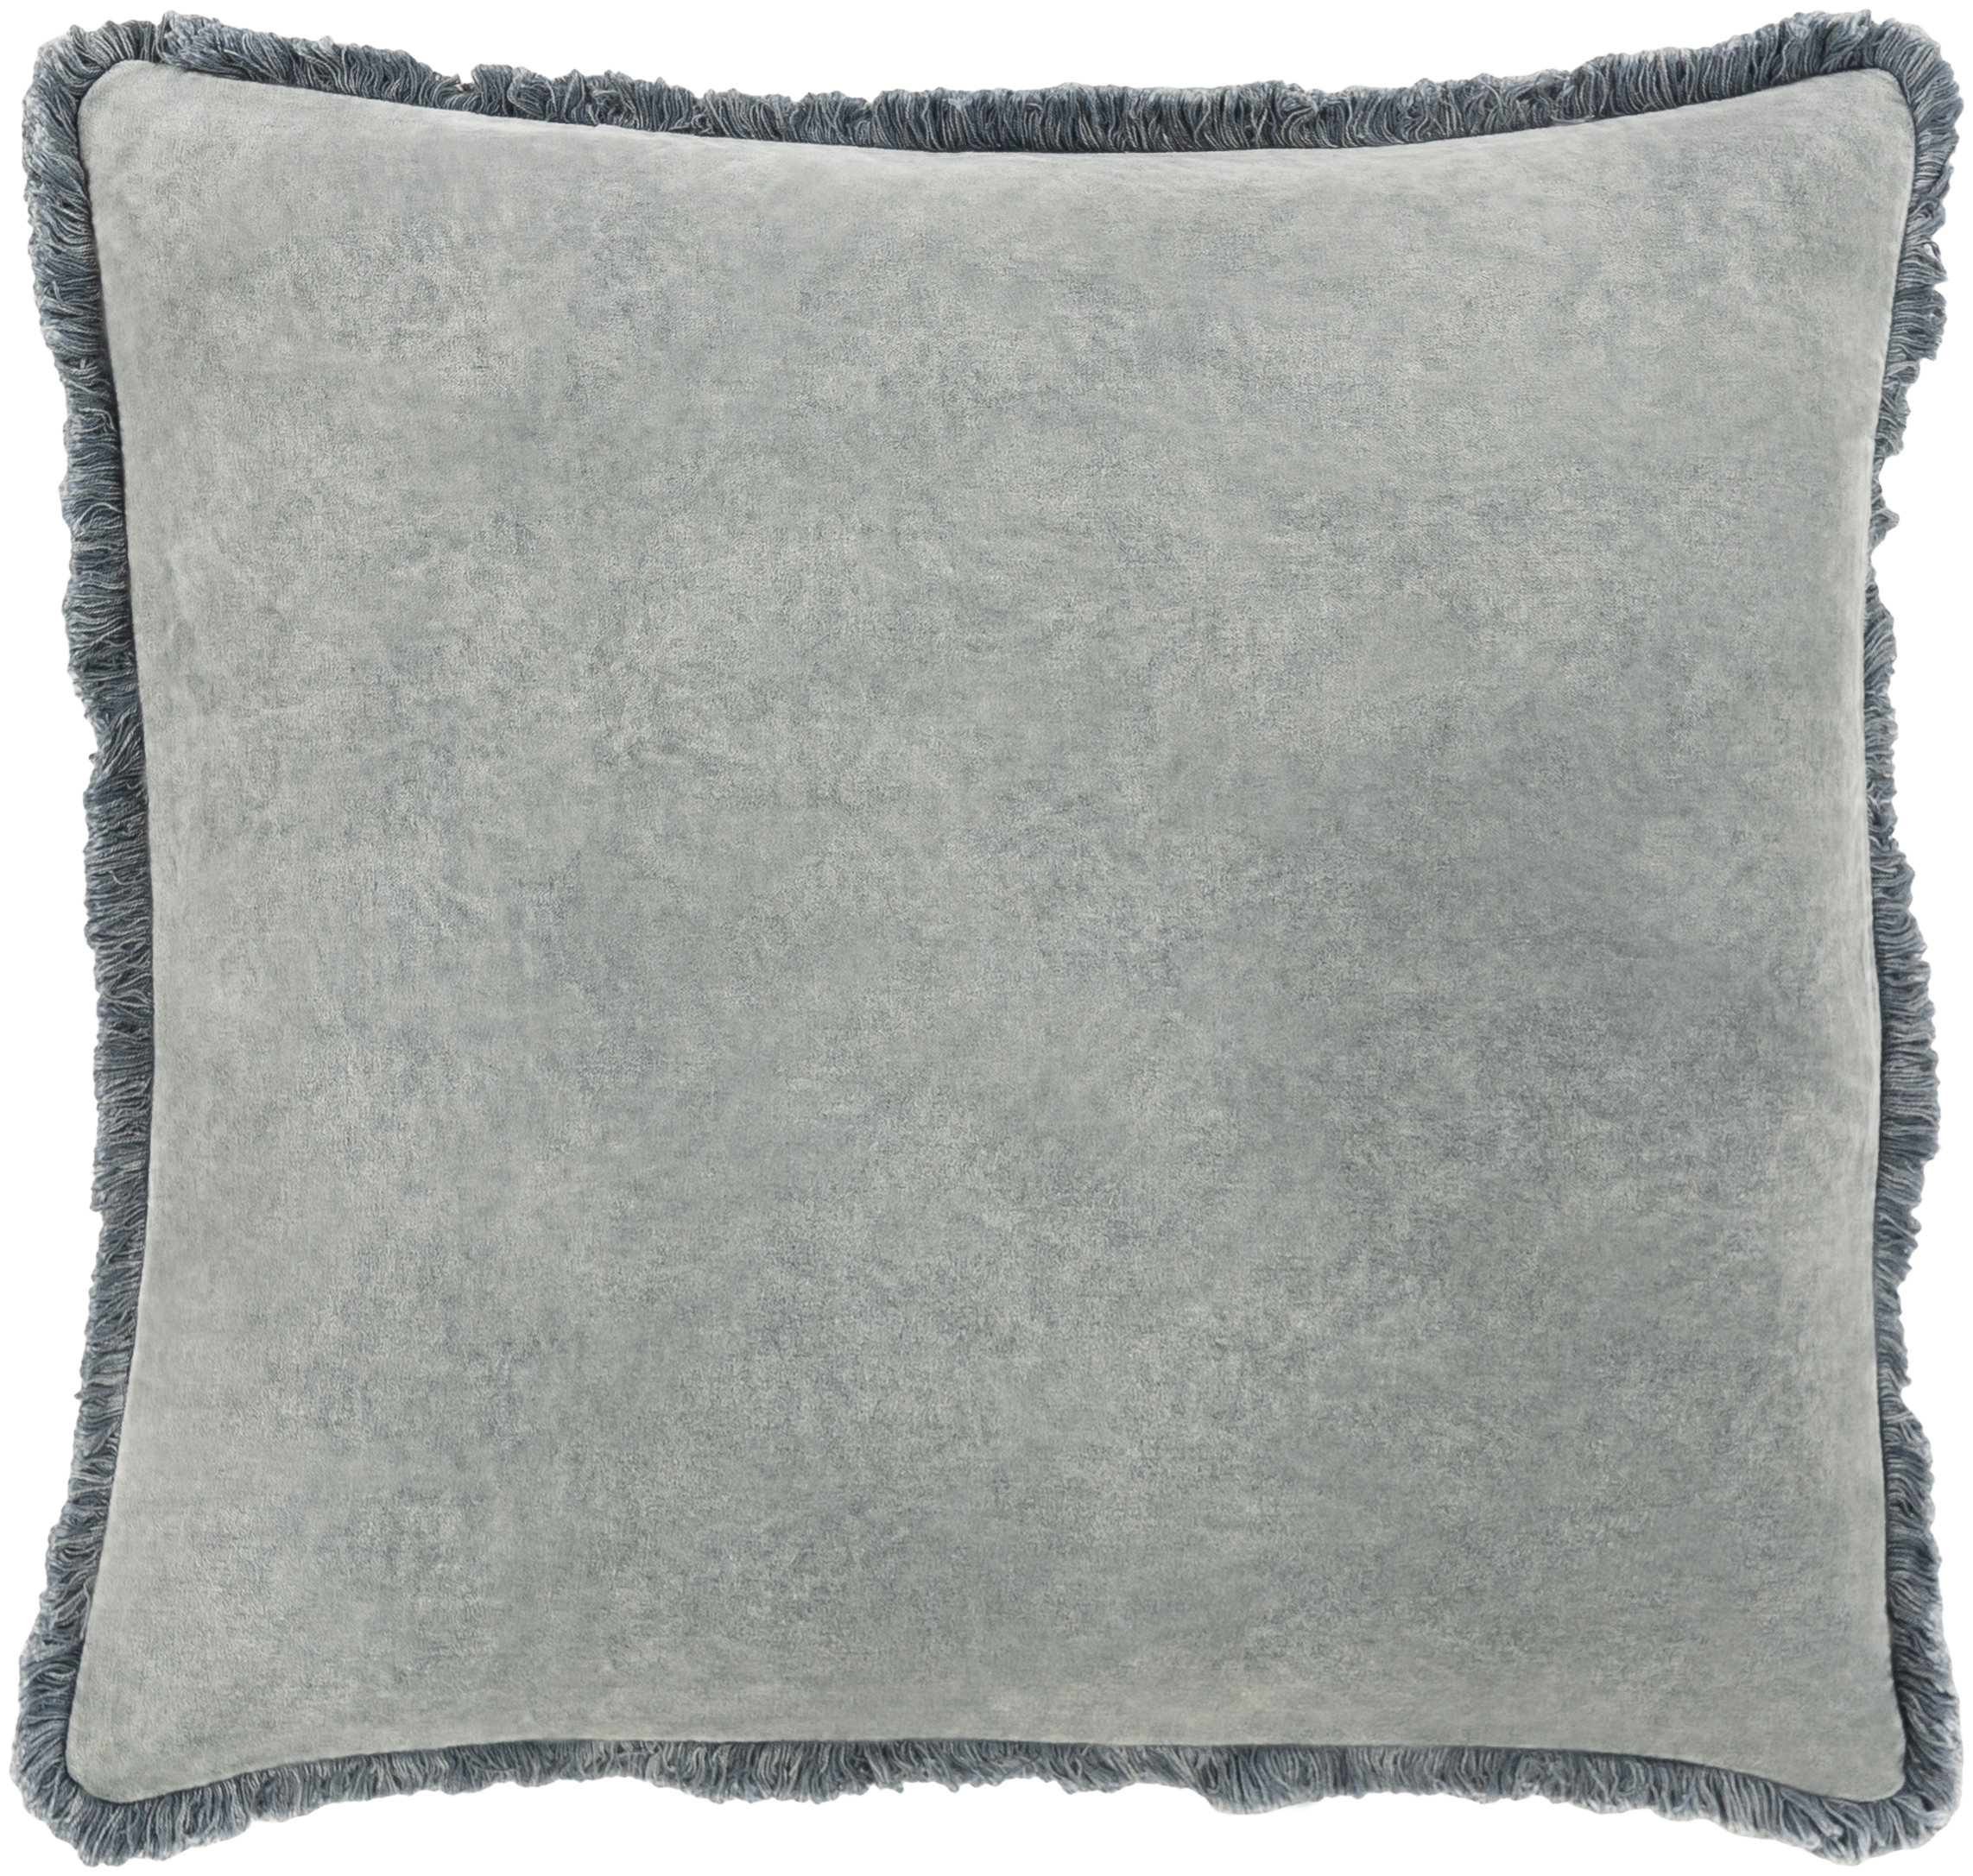 Washed Cotton Velvet Throw Pillow, 20" x 20", with down insert - Image 0